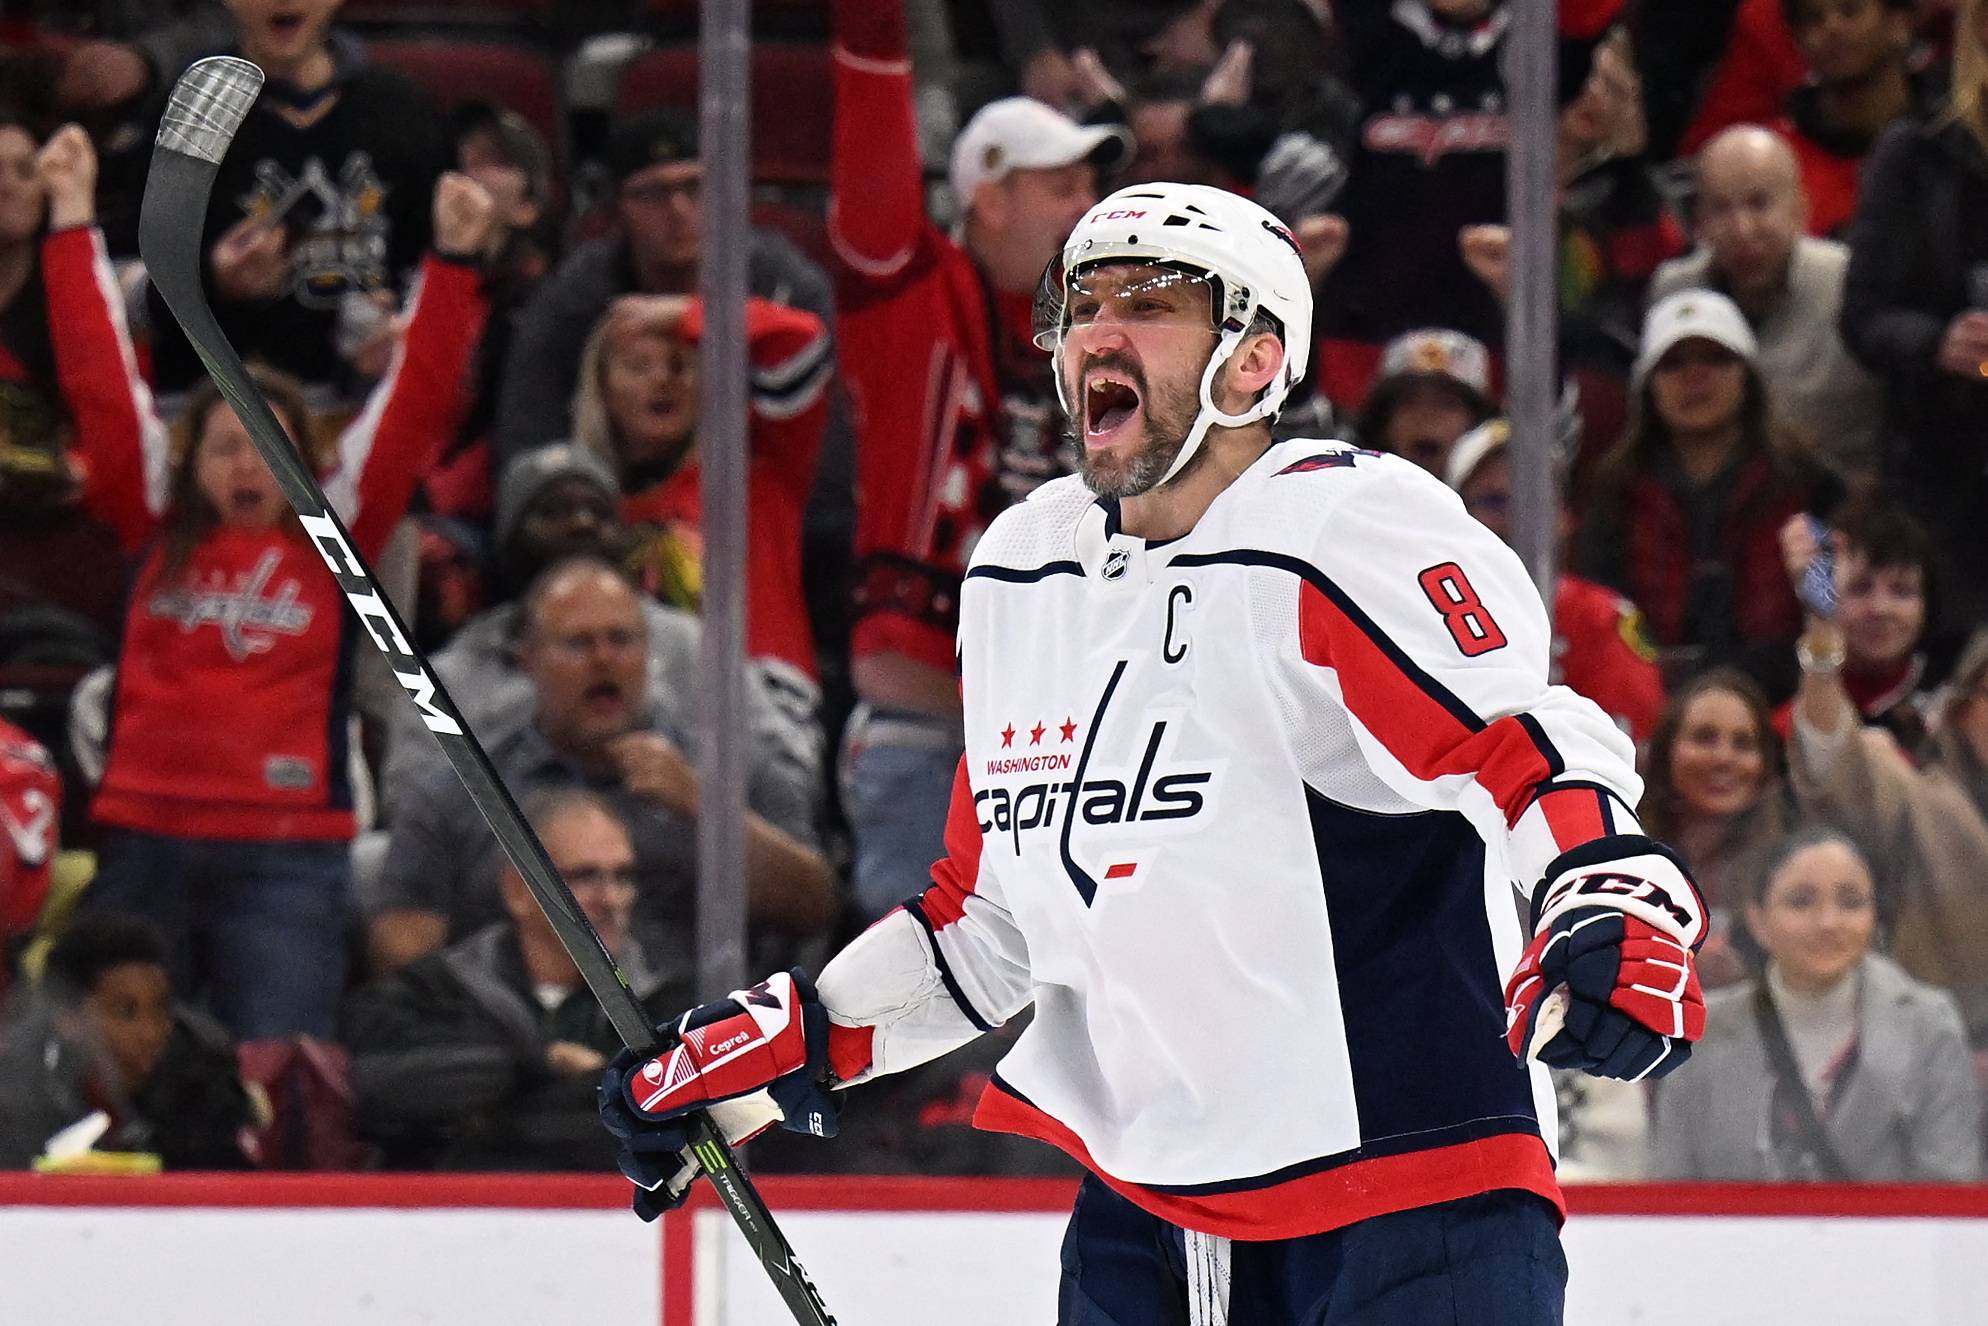 Alex Ovechkin Has 802 Goals. Wayne Gretzky Is Next in His Sights